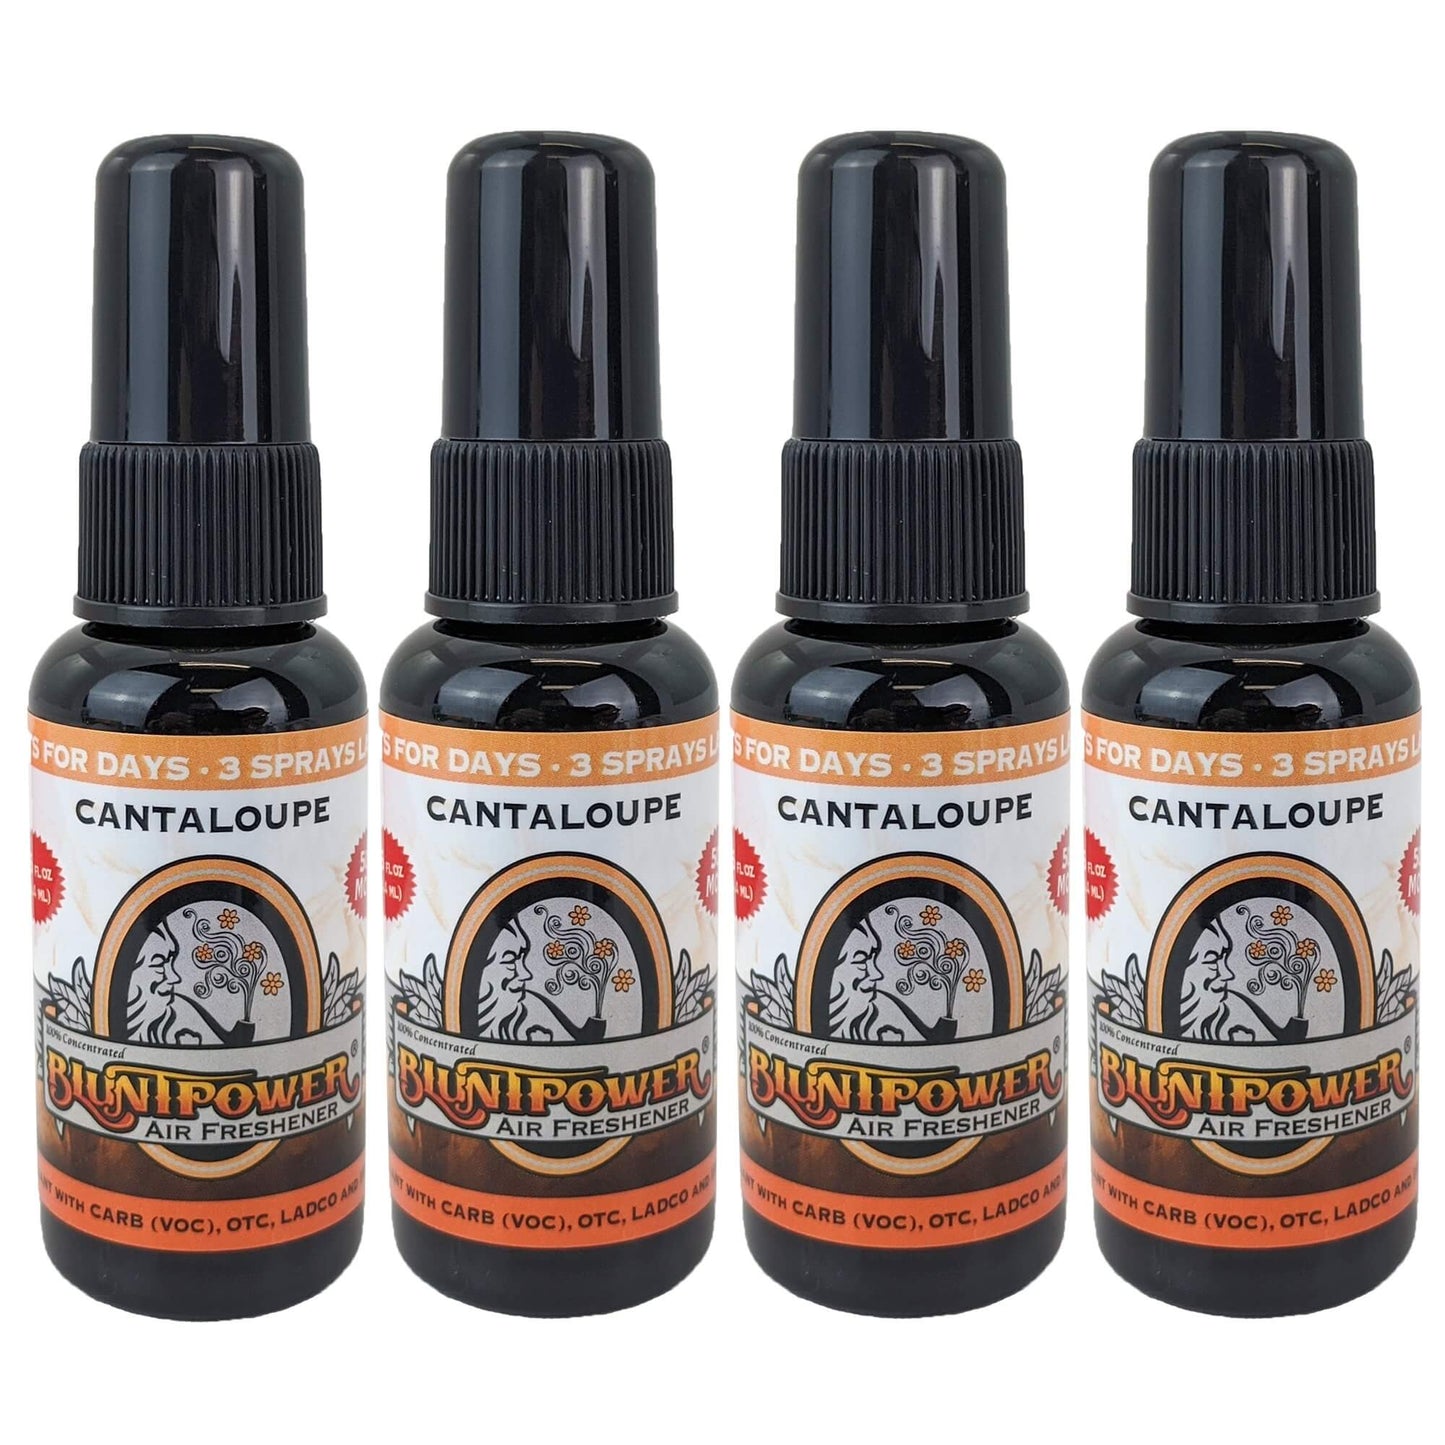 4-Pack: Blunt Power Spray 1.5 OZ Cantaloupe Scent